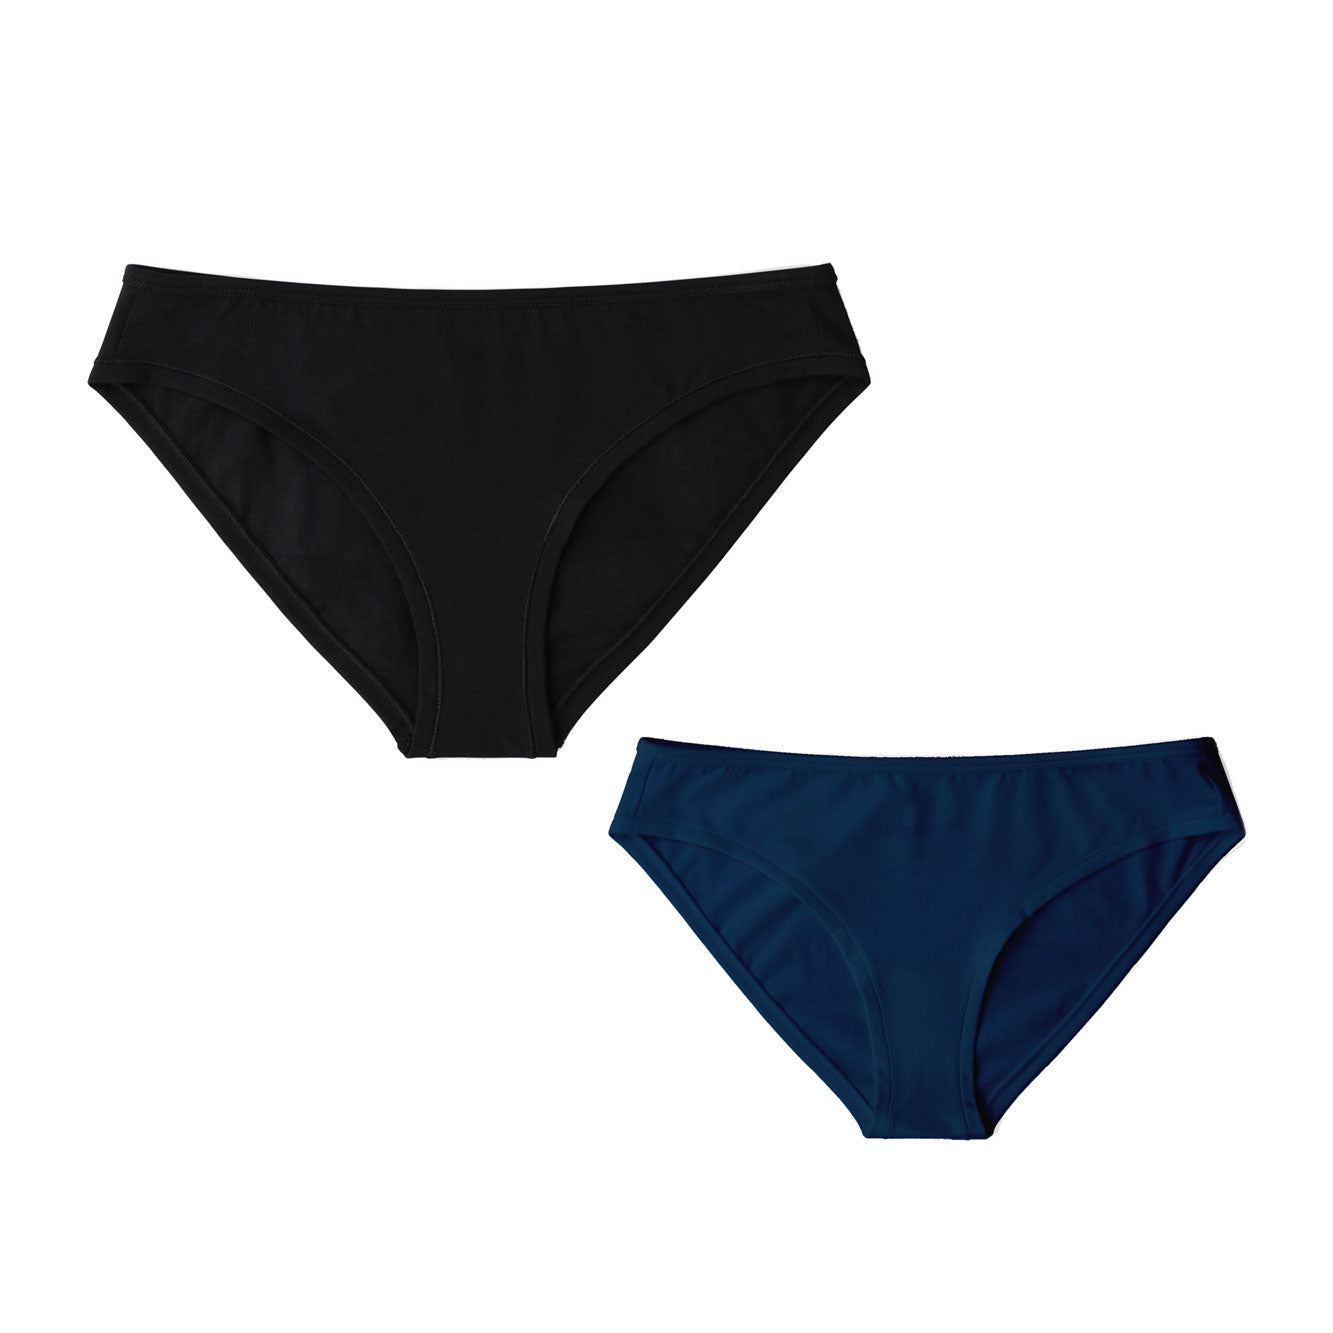 Black and Navy ladies underwear, mid rise briefs, first fit promise 2 pack